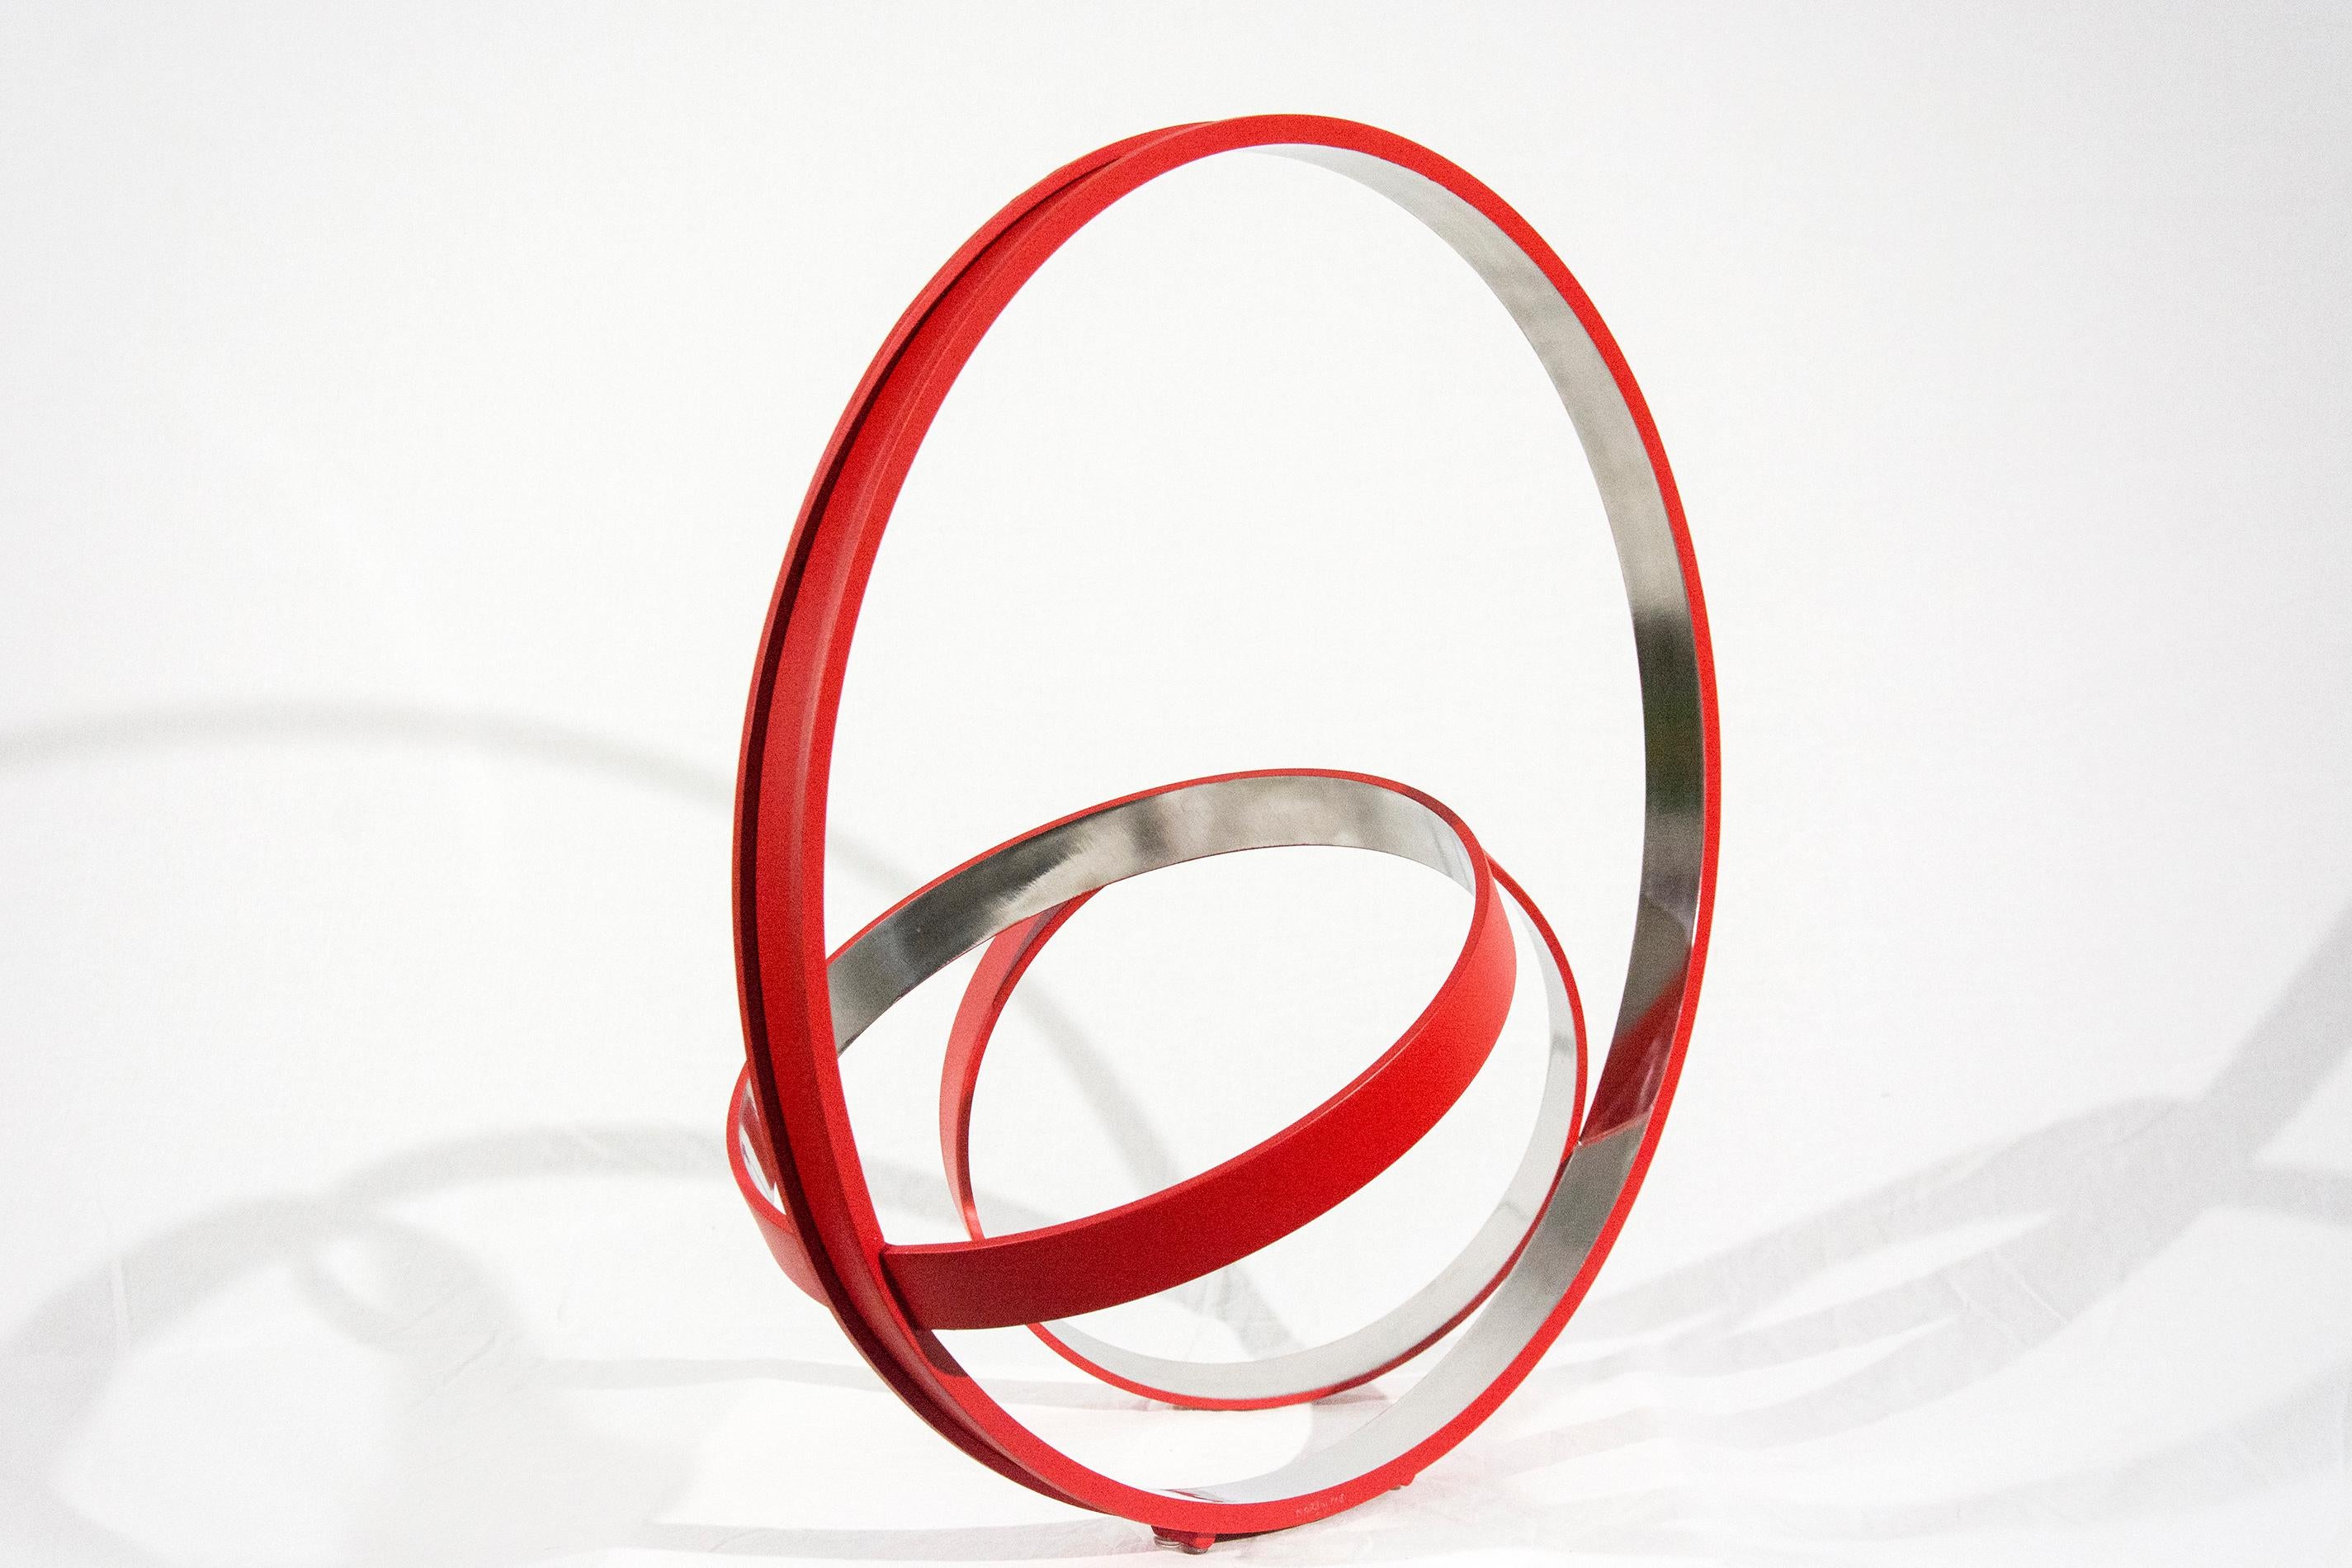 Three stainless steel rings, polished on the inside and a matte cardinal red on the exterior, are curated into an elegant, minimalist composition by Philippe Pallafray. The title of the sculpture may translate as ‘no time’ or timeless suggesting